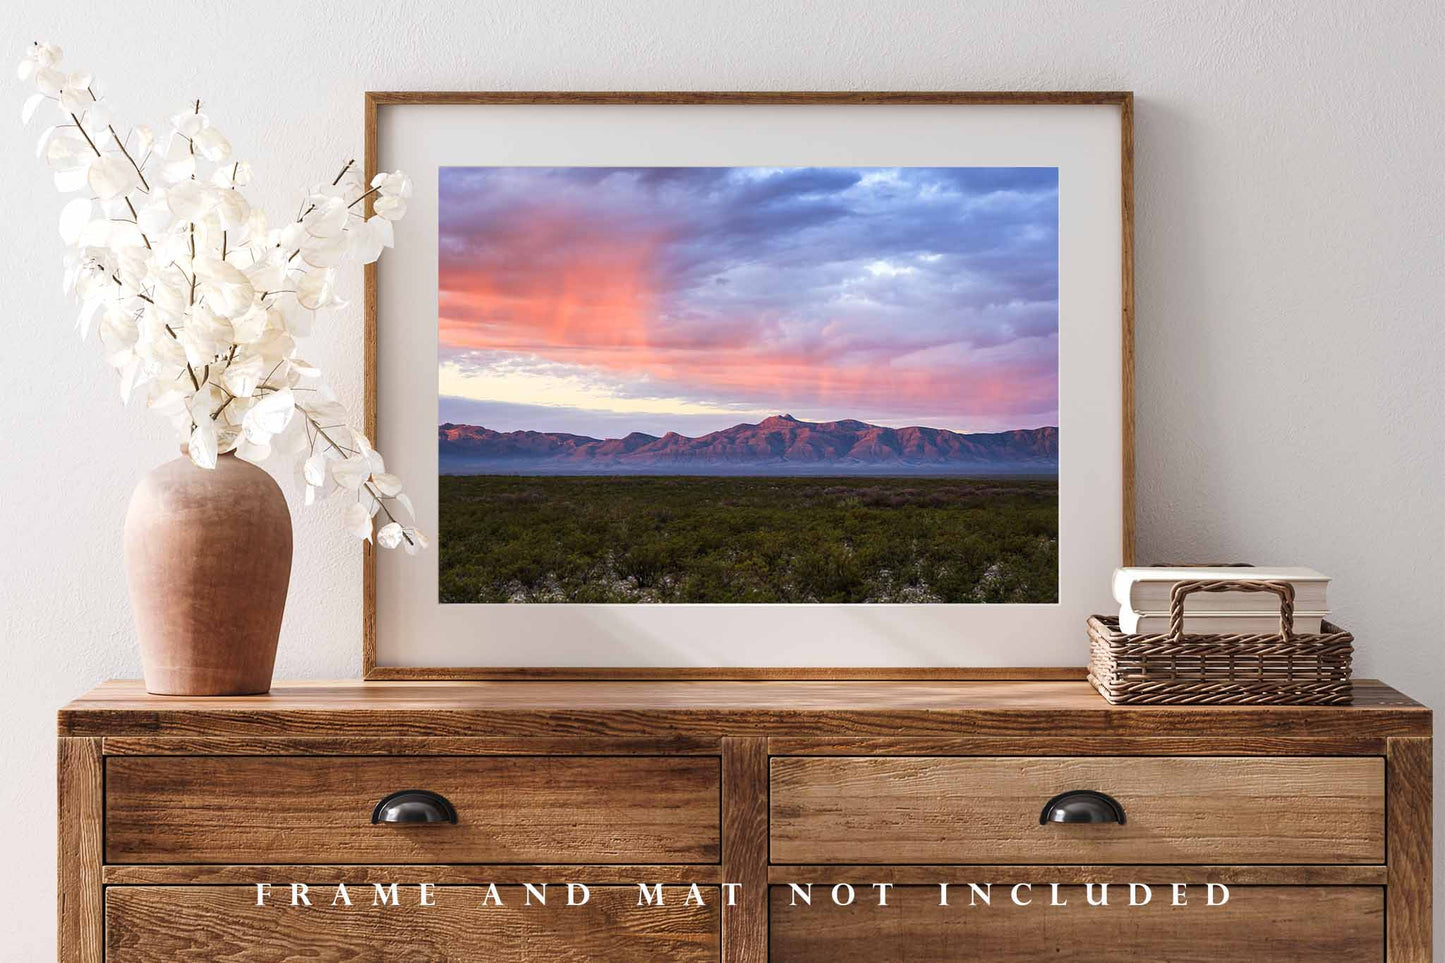 Chihuhuan Desert Photography Print (Not Framed) Picture of Sunlit Clouds Over Del Norte-Santiago Mountains at Sunrise in West Texas Big Bend Wall Art Western Decor